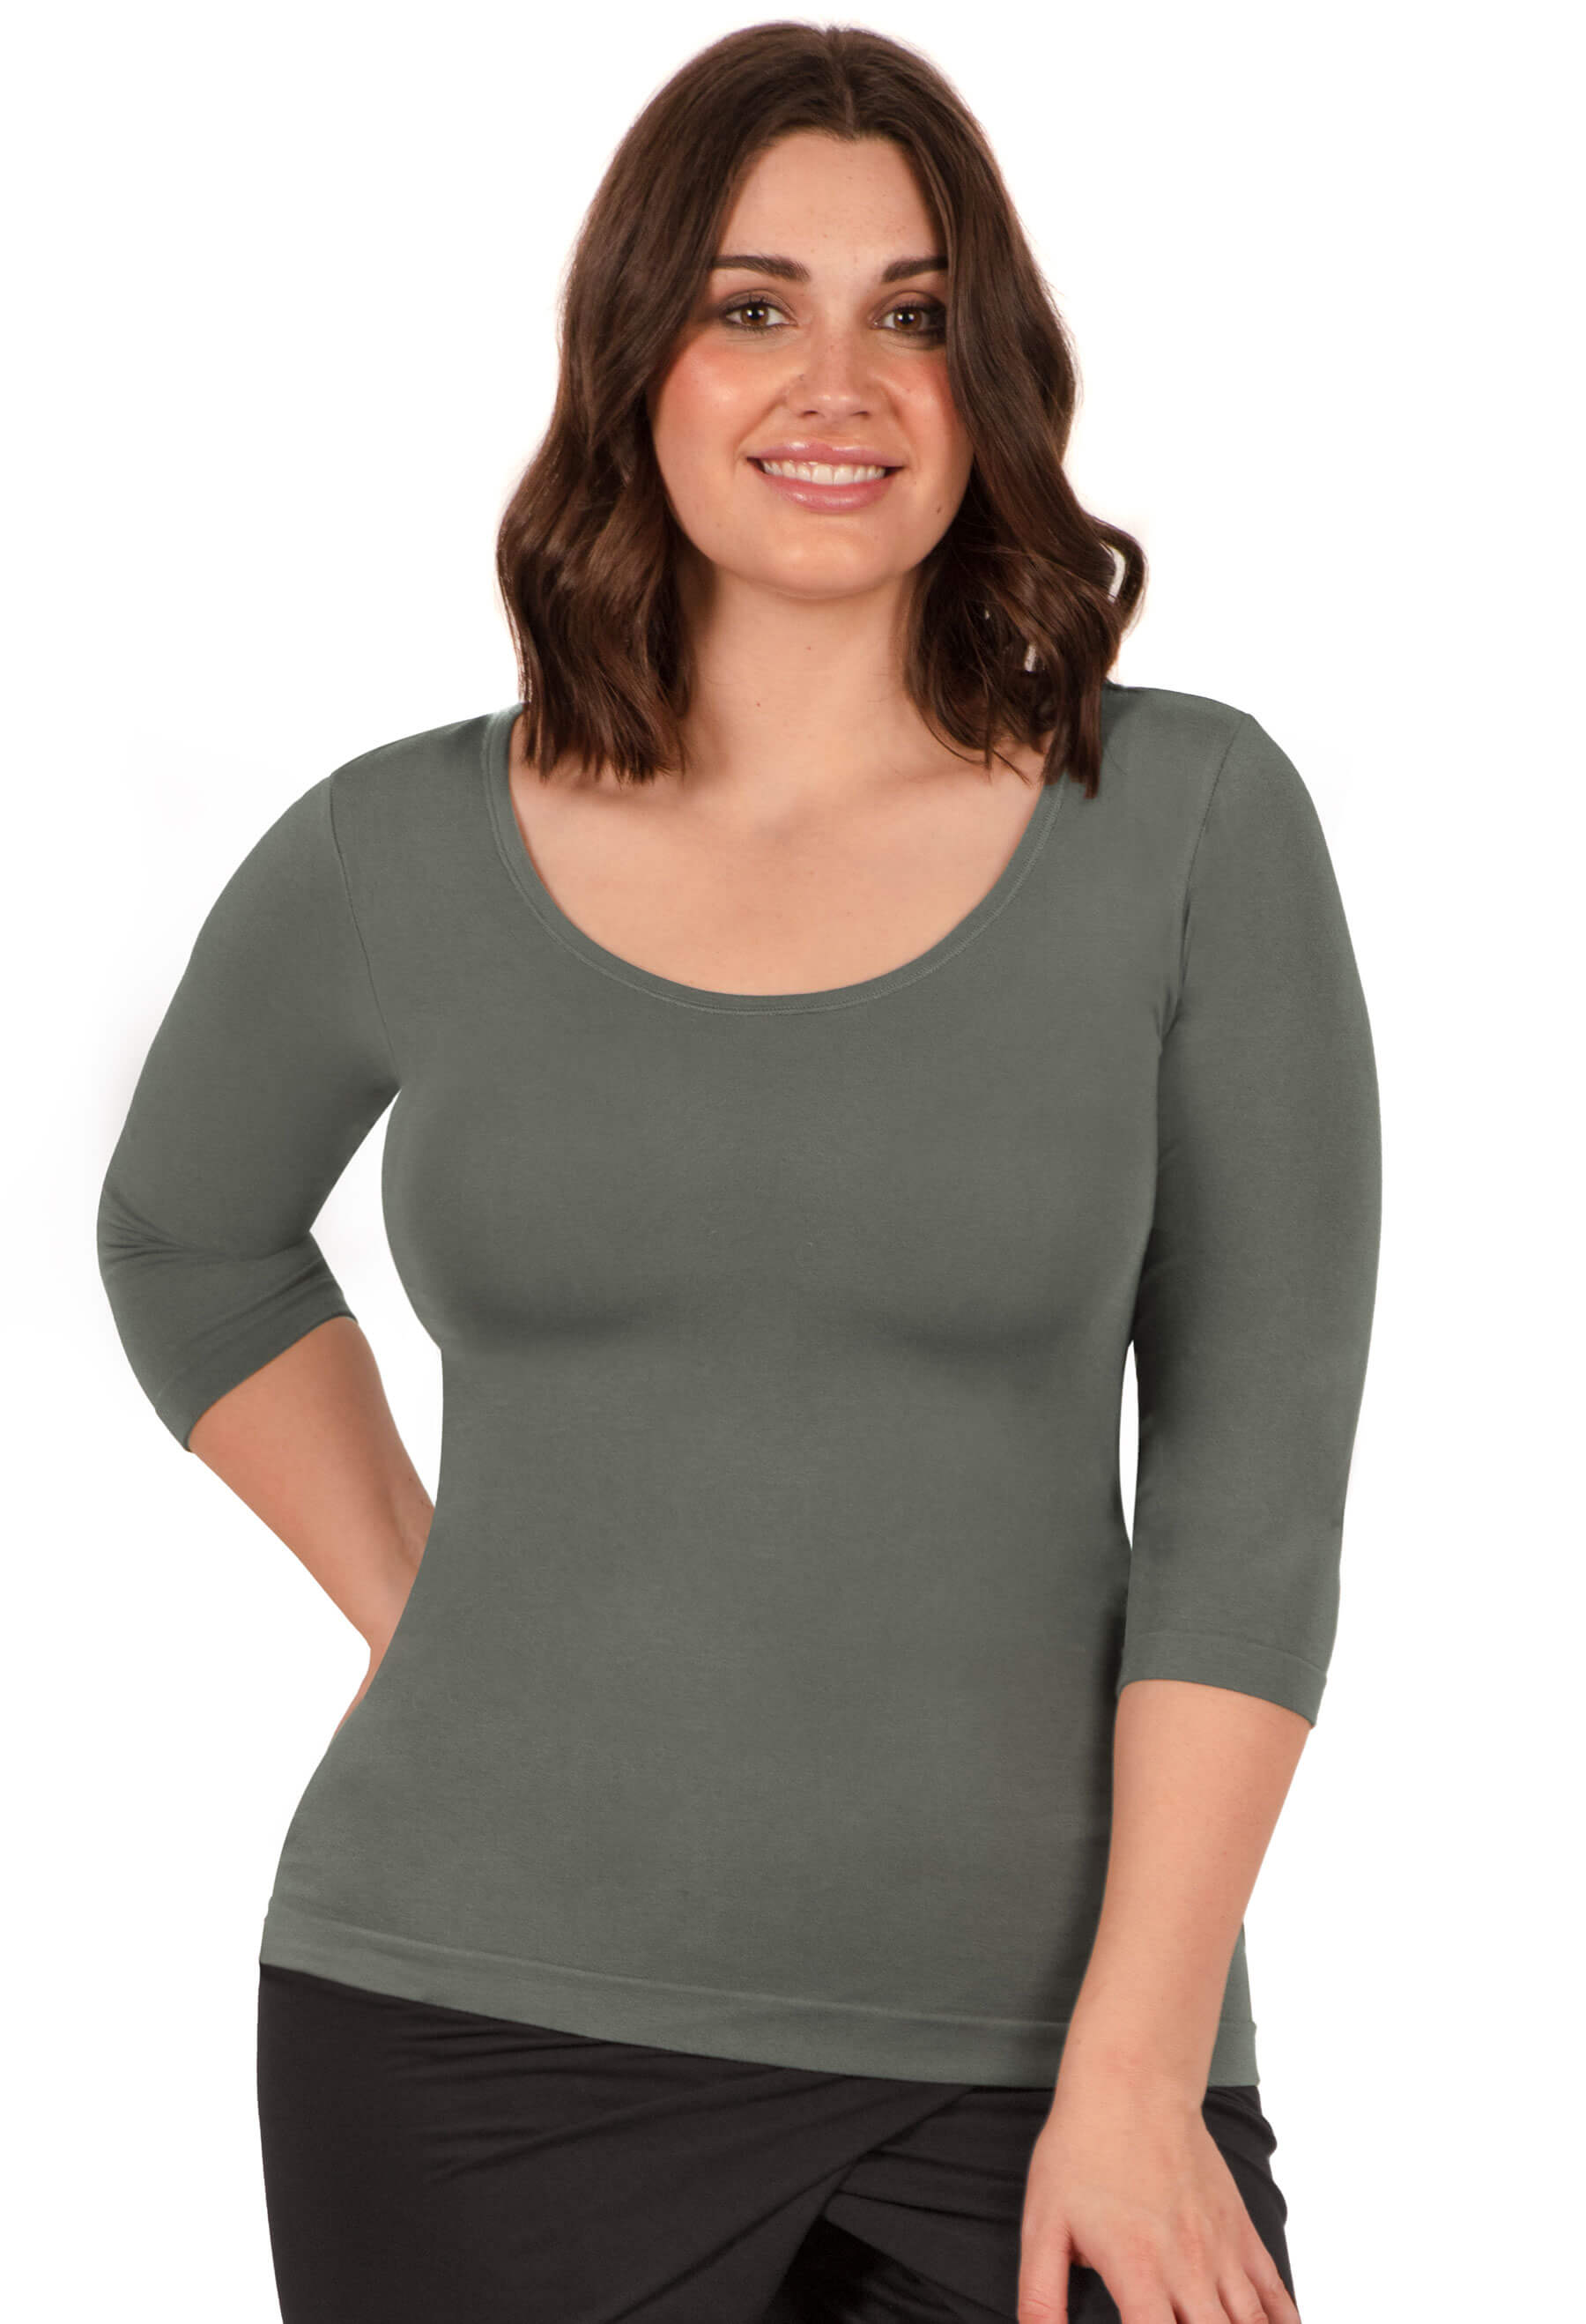 Curvy Bamboo 3/4 Sleeve Top - Silky Soft Bamboo, Embraces Curves